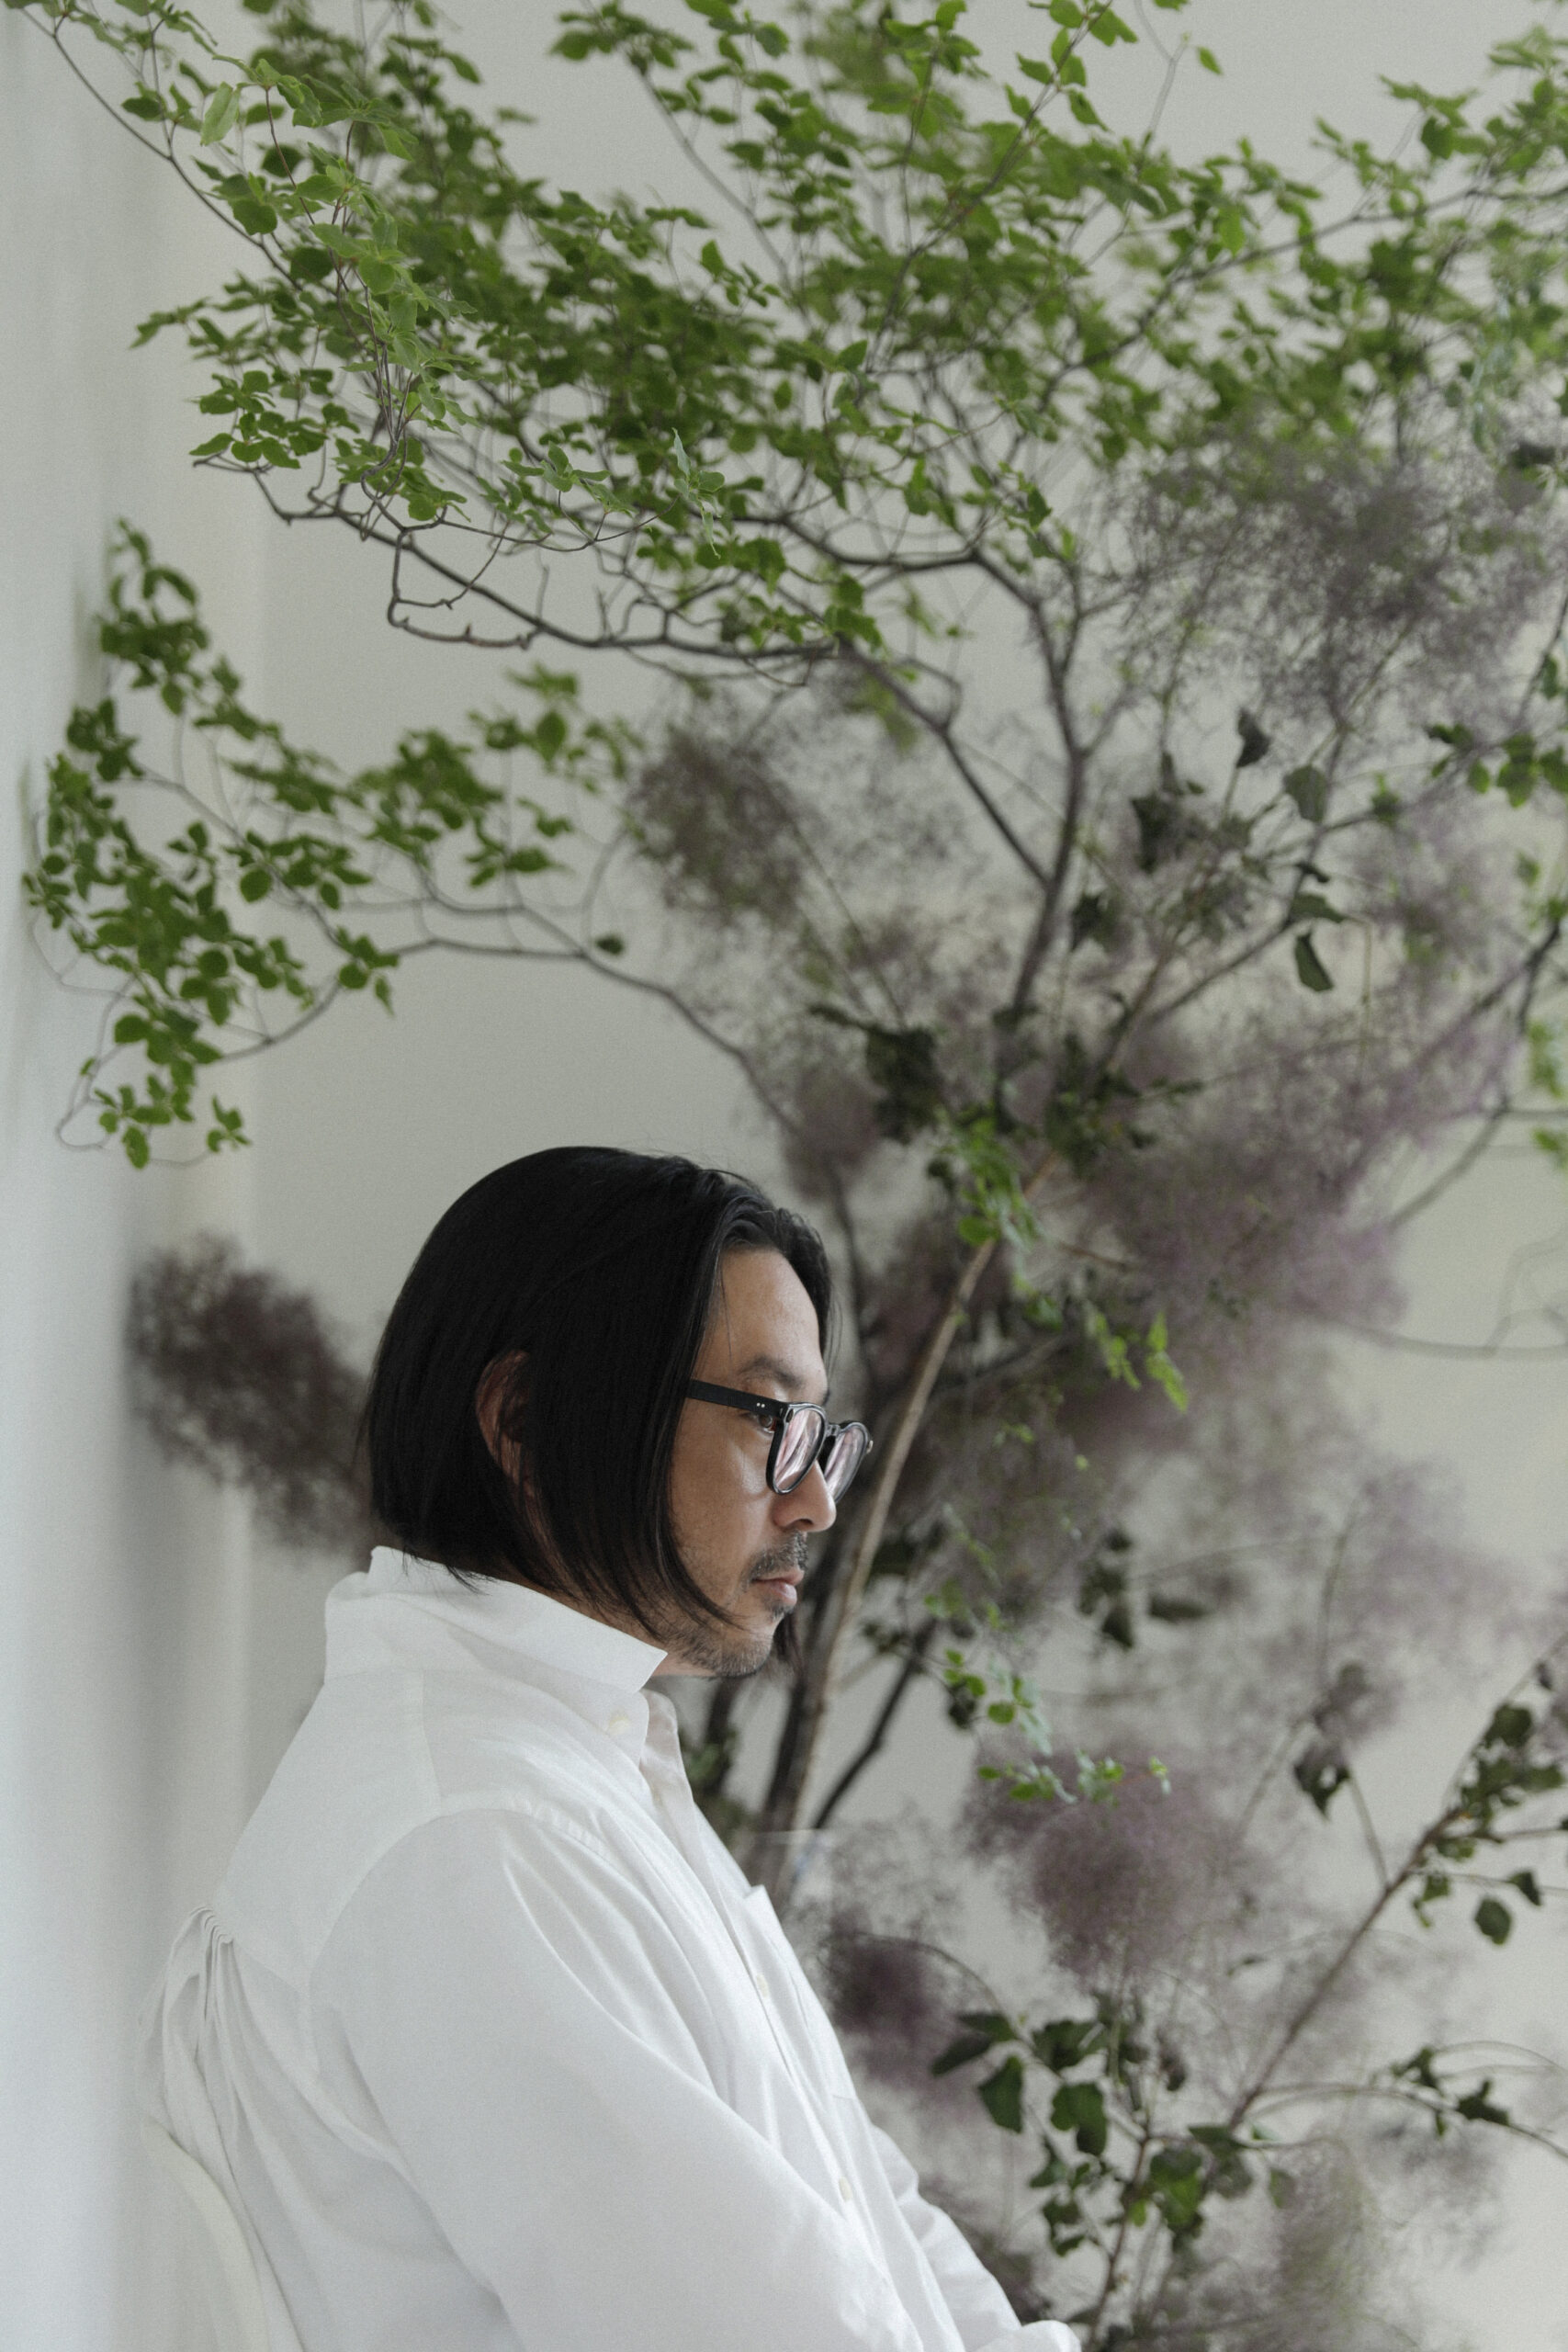 The Designer of His Eponymous Brand, Fumito Ganryu vol.1–Clothes